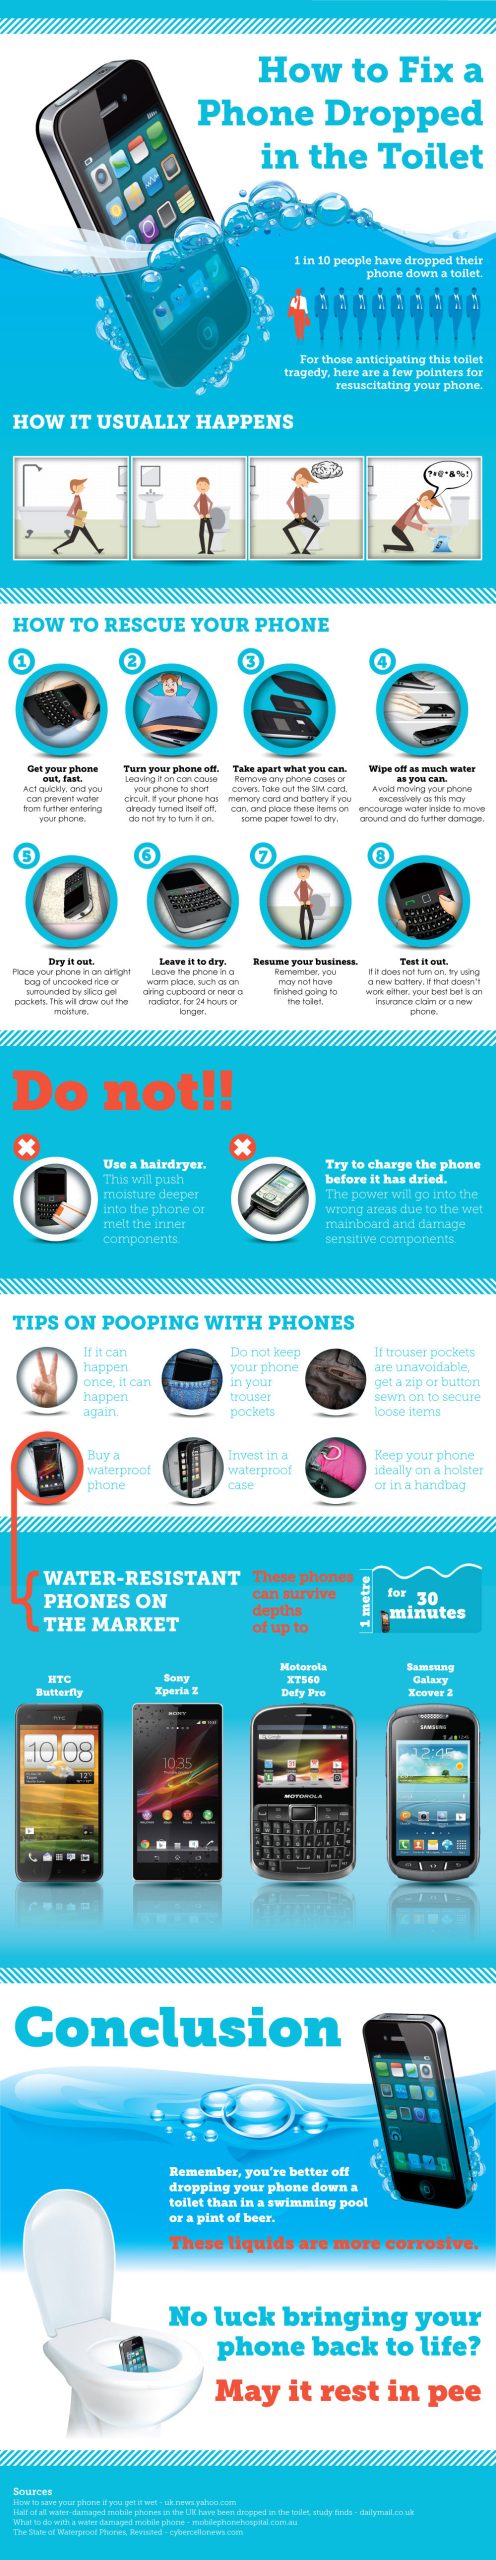 Infographic: How to Fix a Phone Dropped in the Toilet